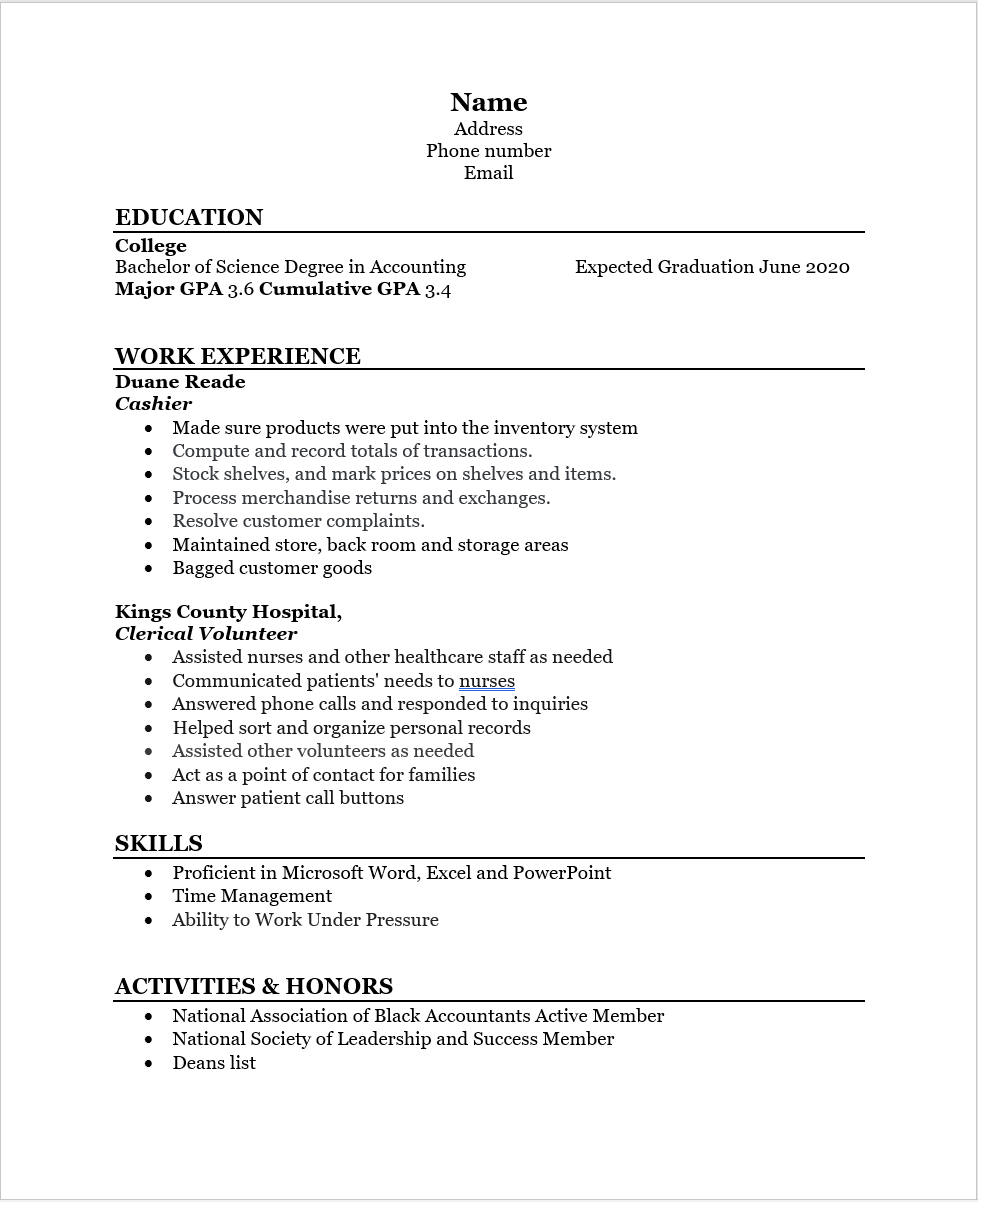 [US] Long time lurker looking for some resume help ...